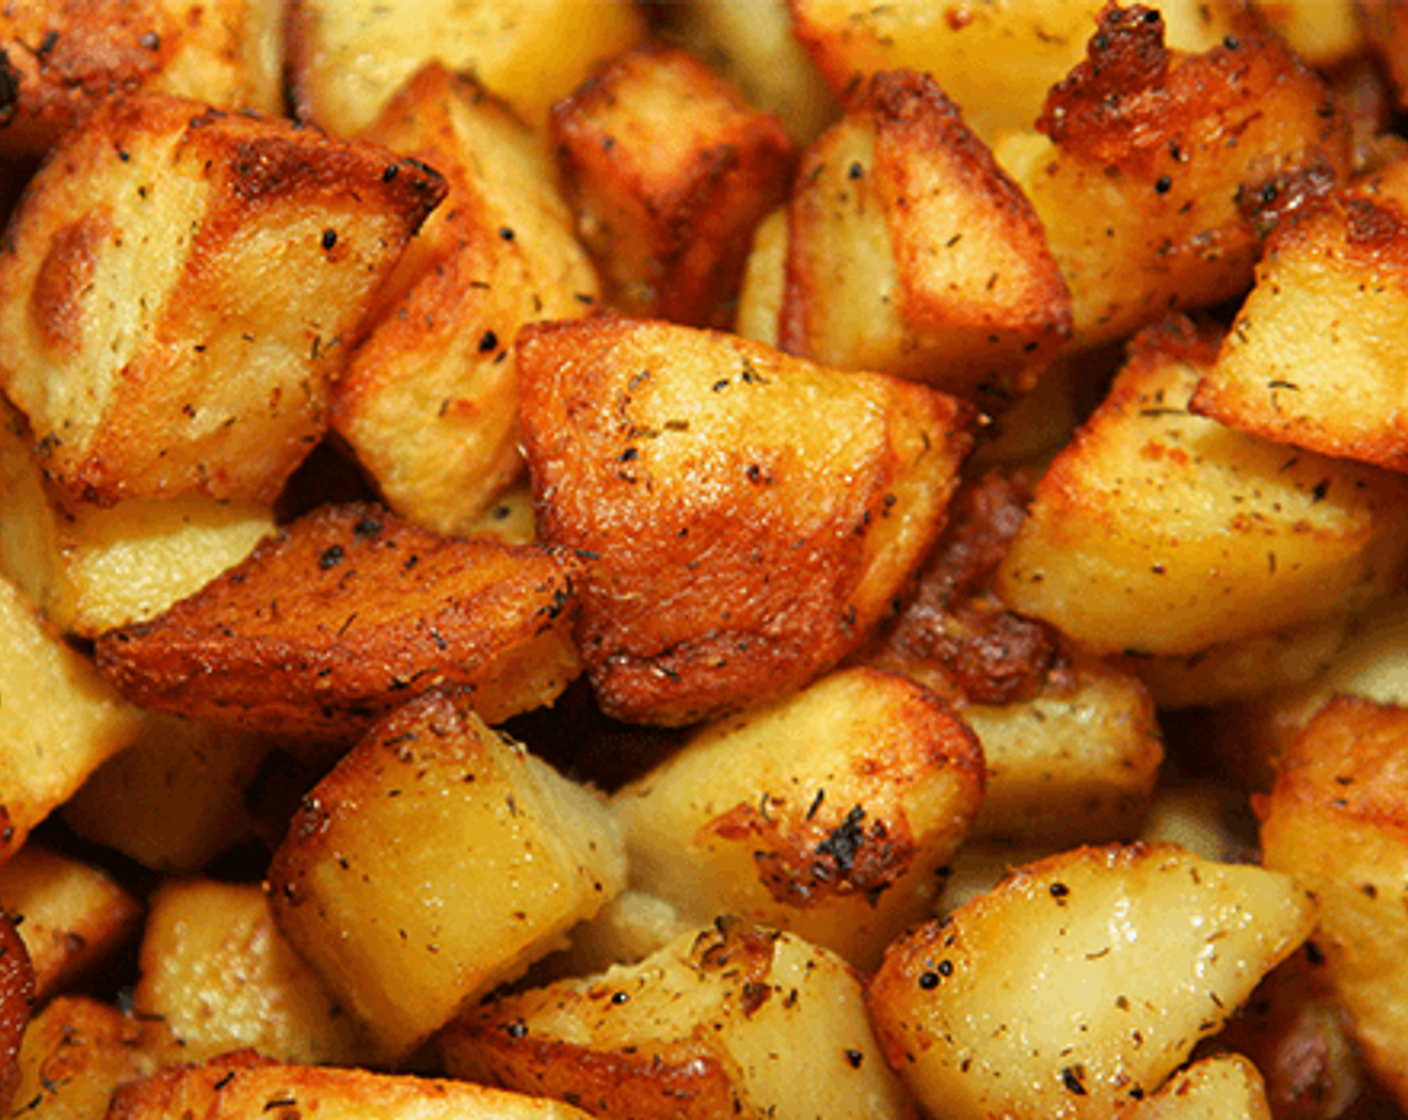 step 7 Once the roasted potatoes are cooked, remove them from the oven. Enjoy these crispy oven-roasted potatoes as a side dish with your favorite protein.